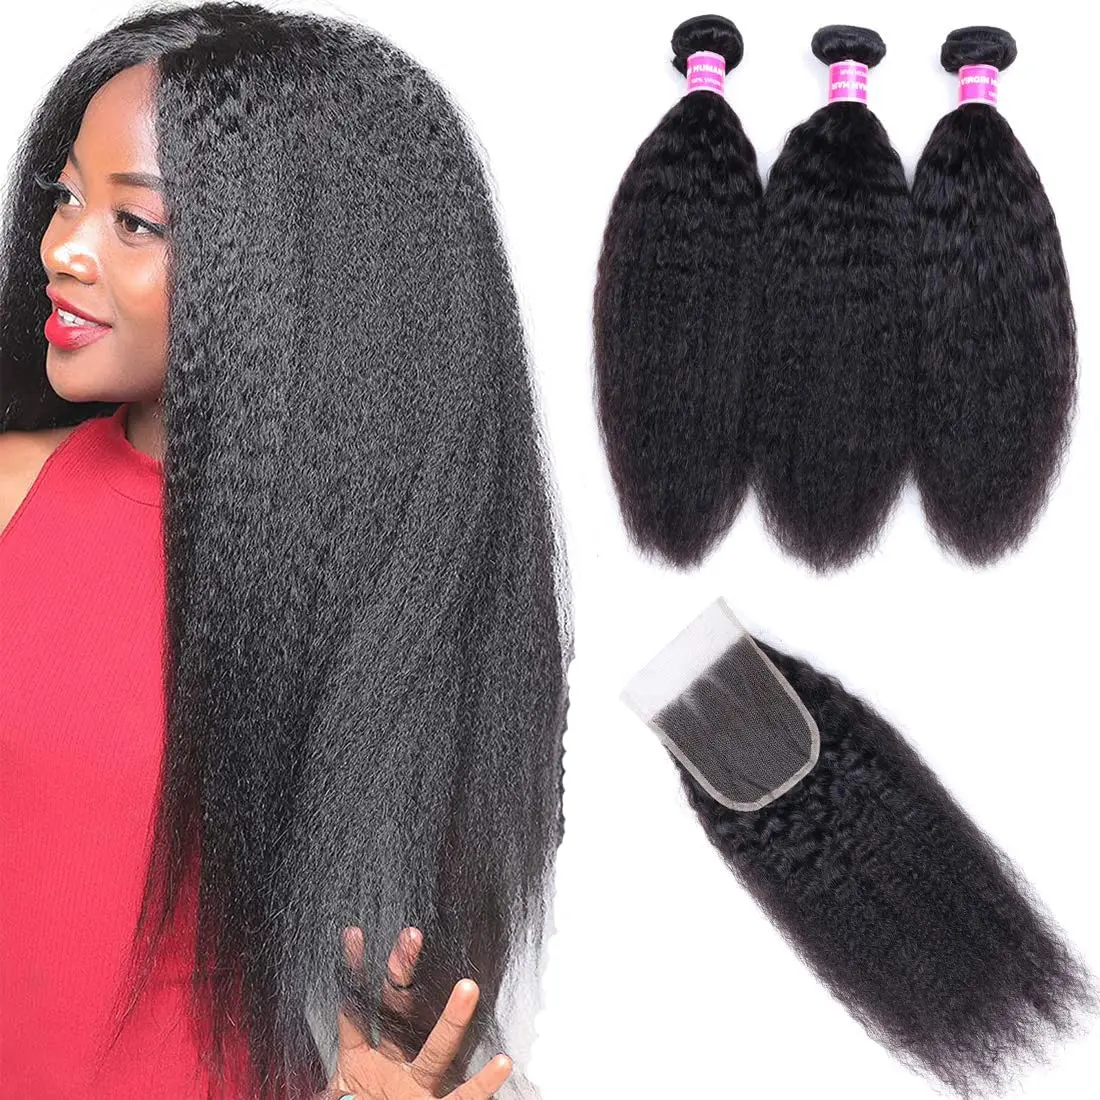 

Kinky Straight Bundles With Closure Human Hair Weaves And Lace Closure 4x4 Natural Peruvian Yaki Hair Extensions For Black Women